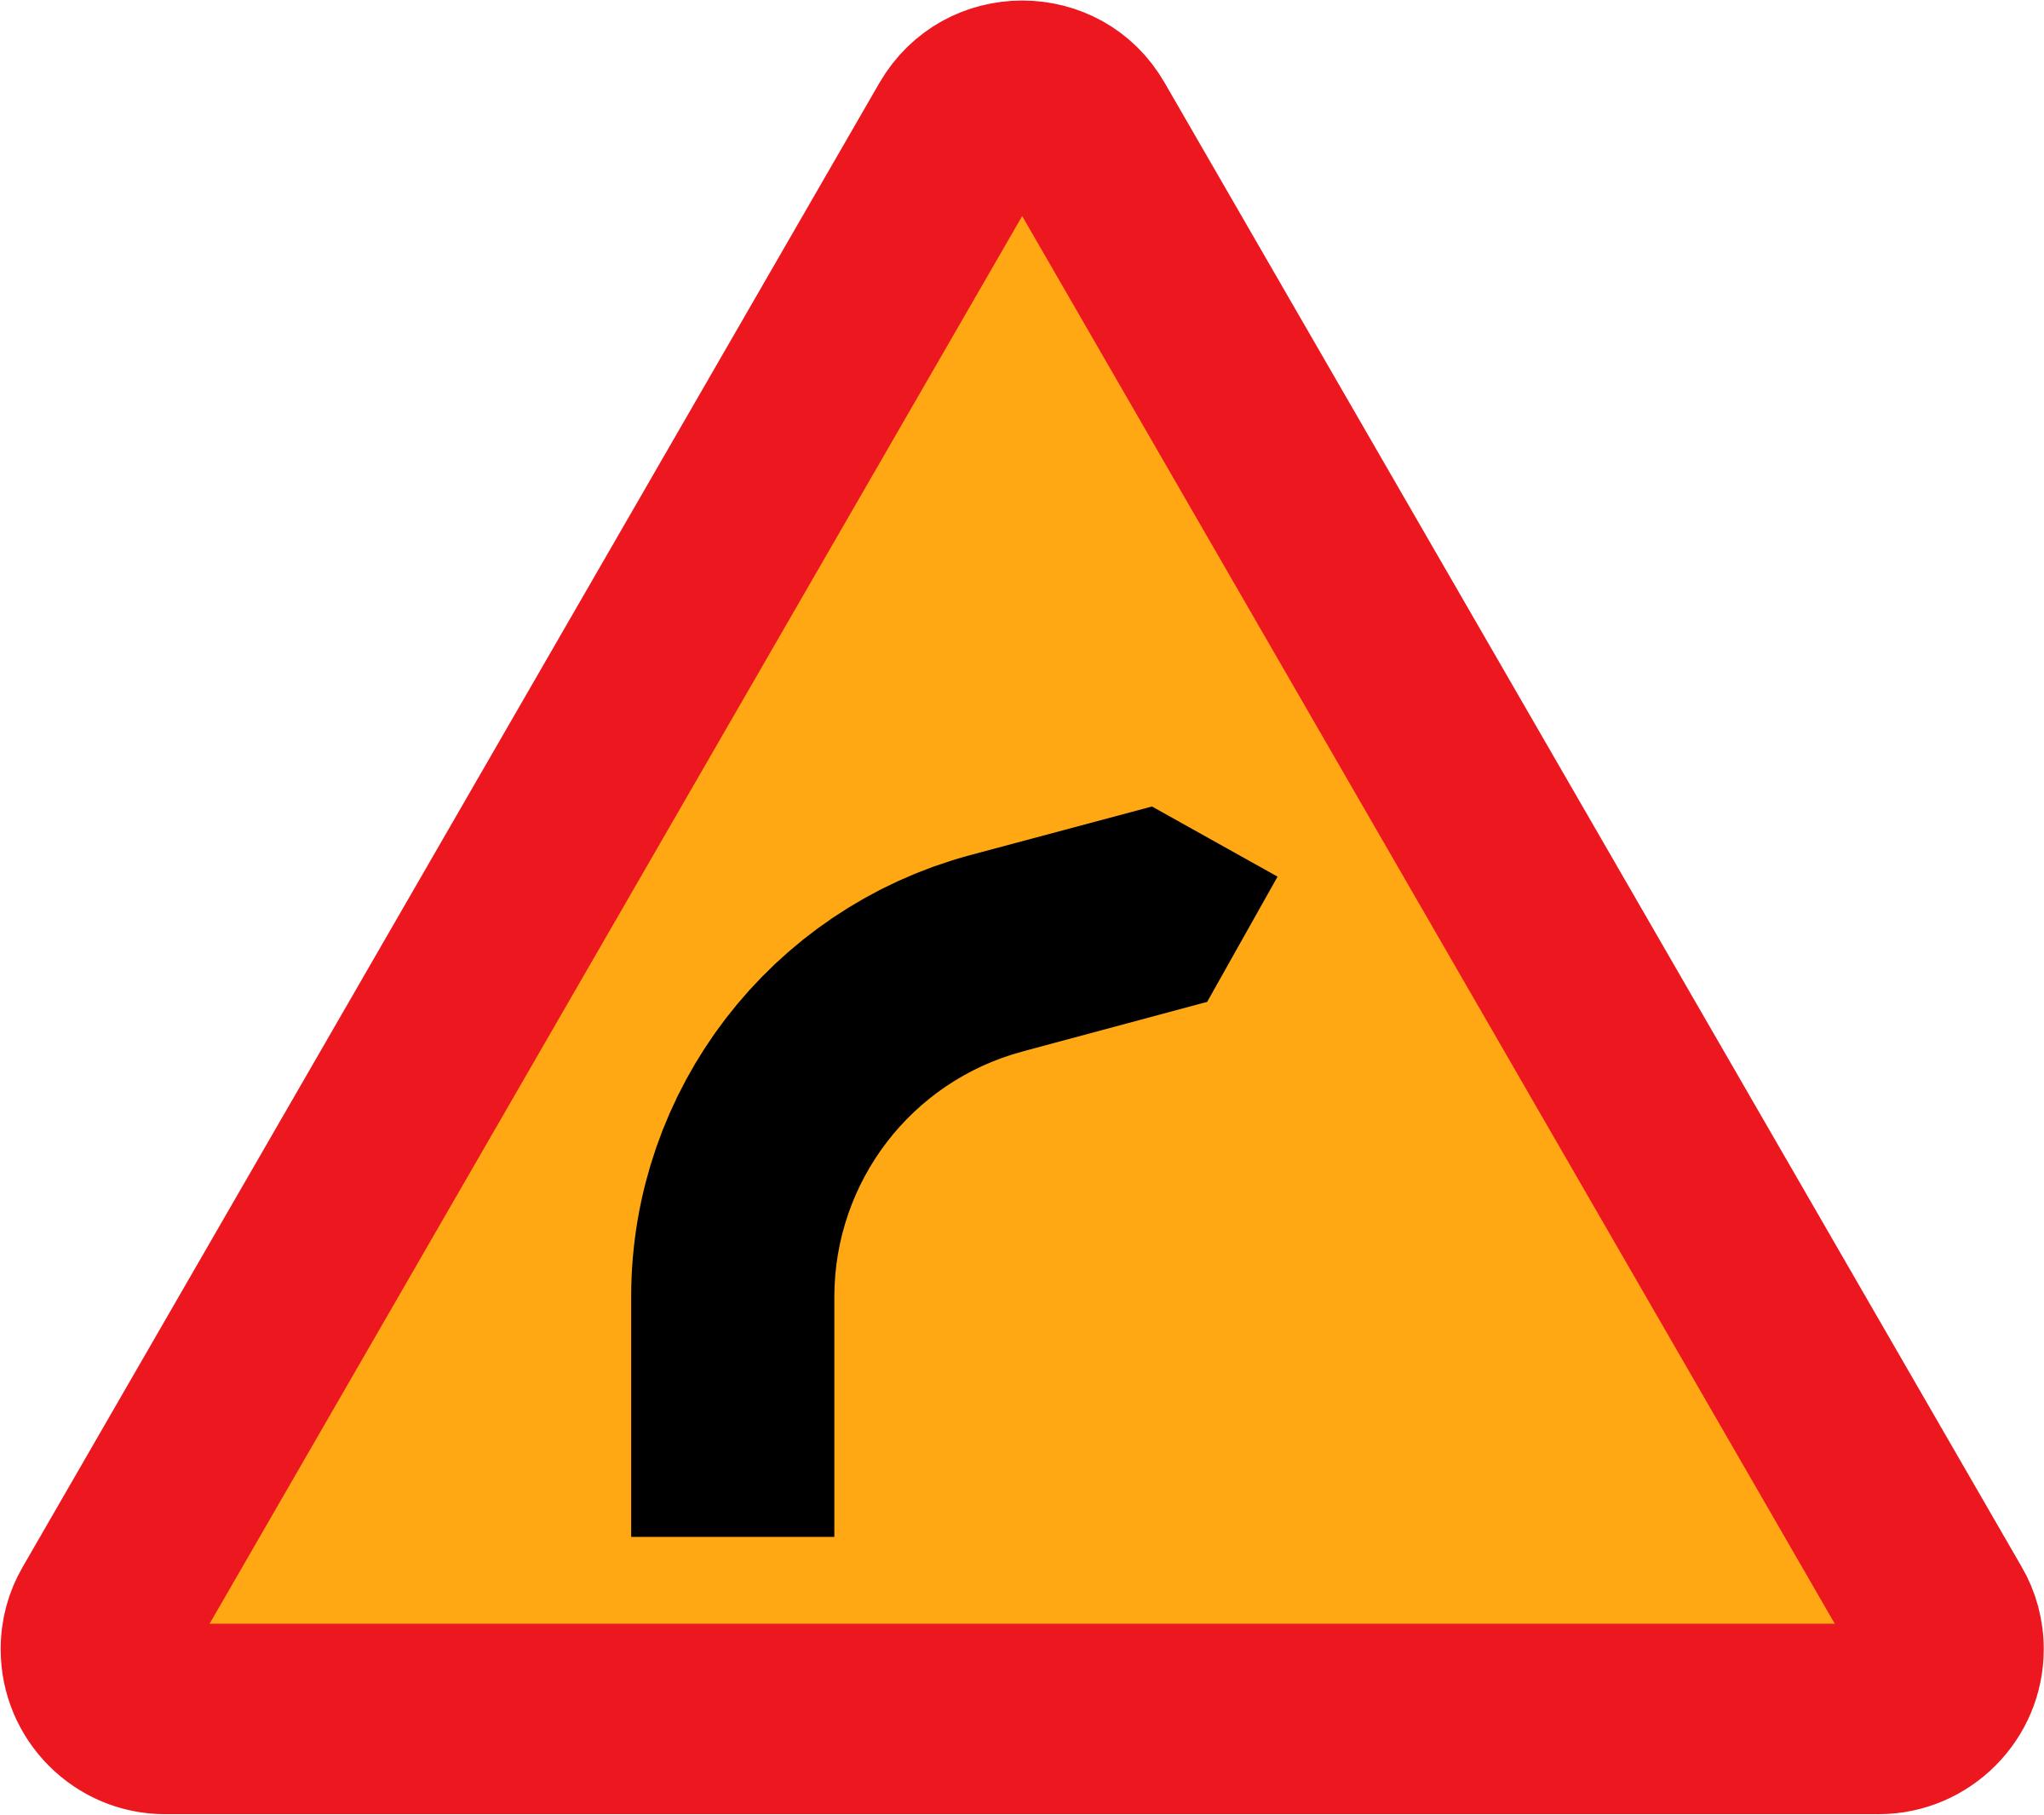 Dangerous bend, bend to right. icons